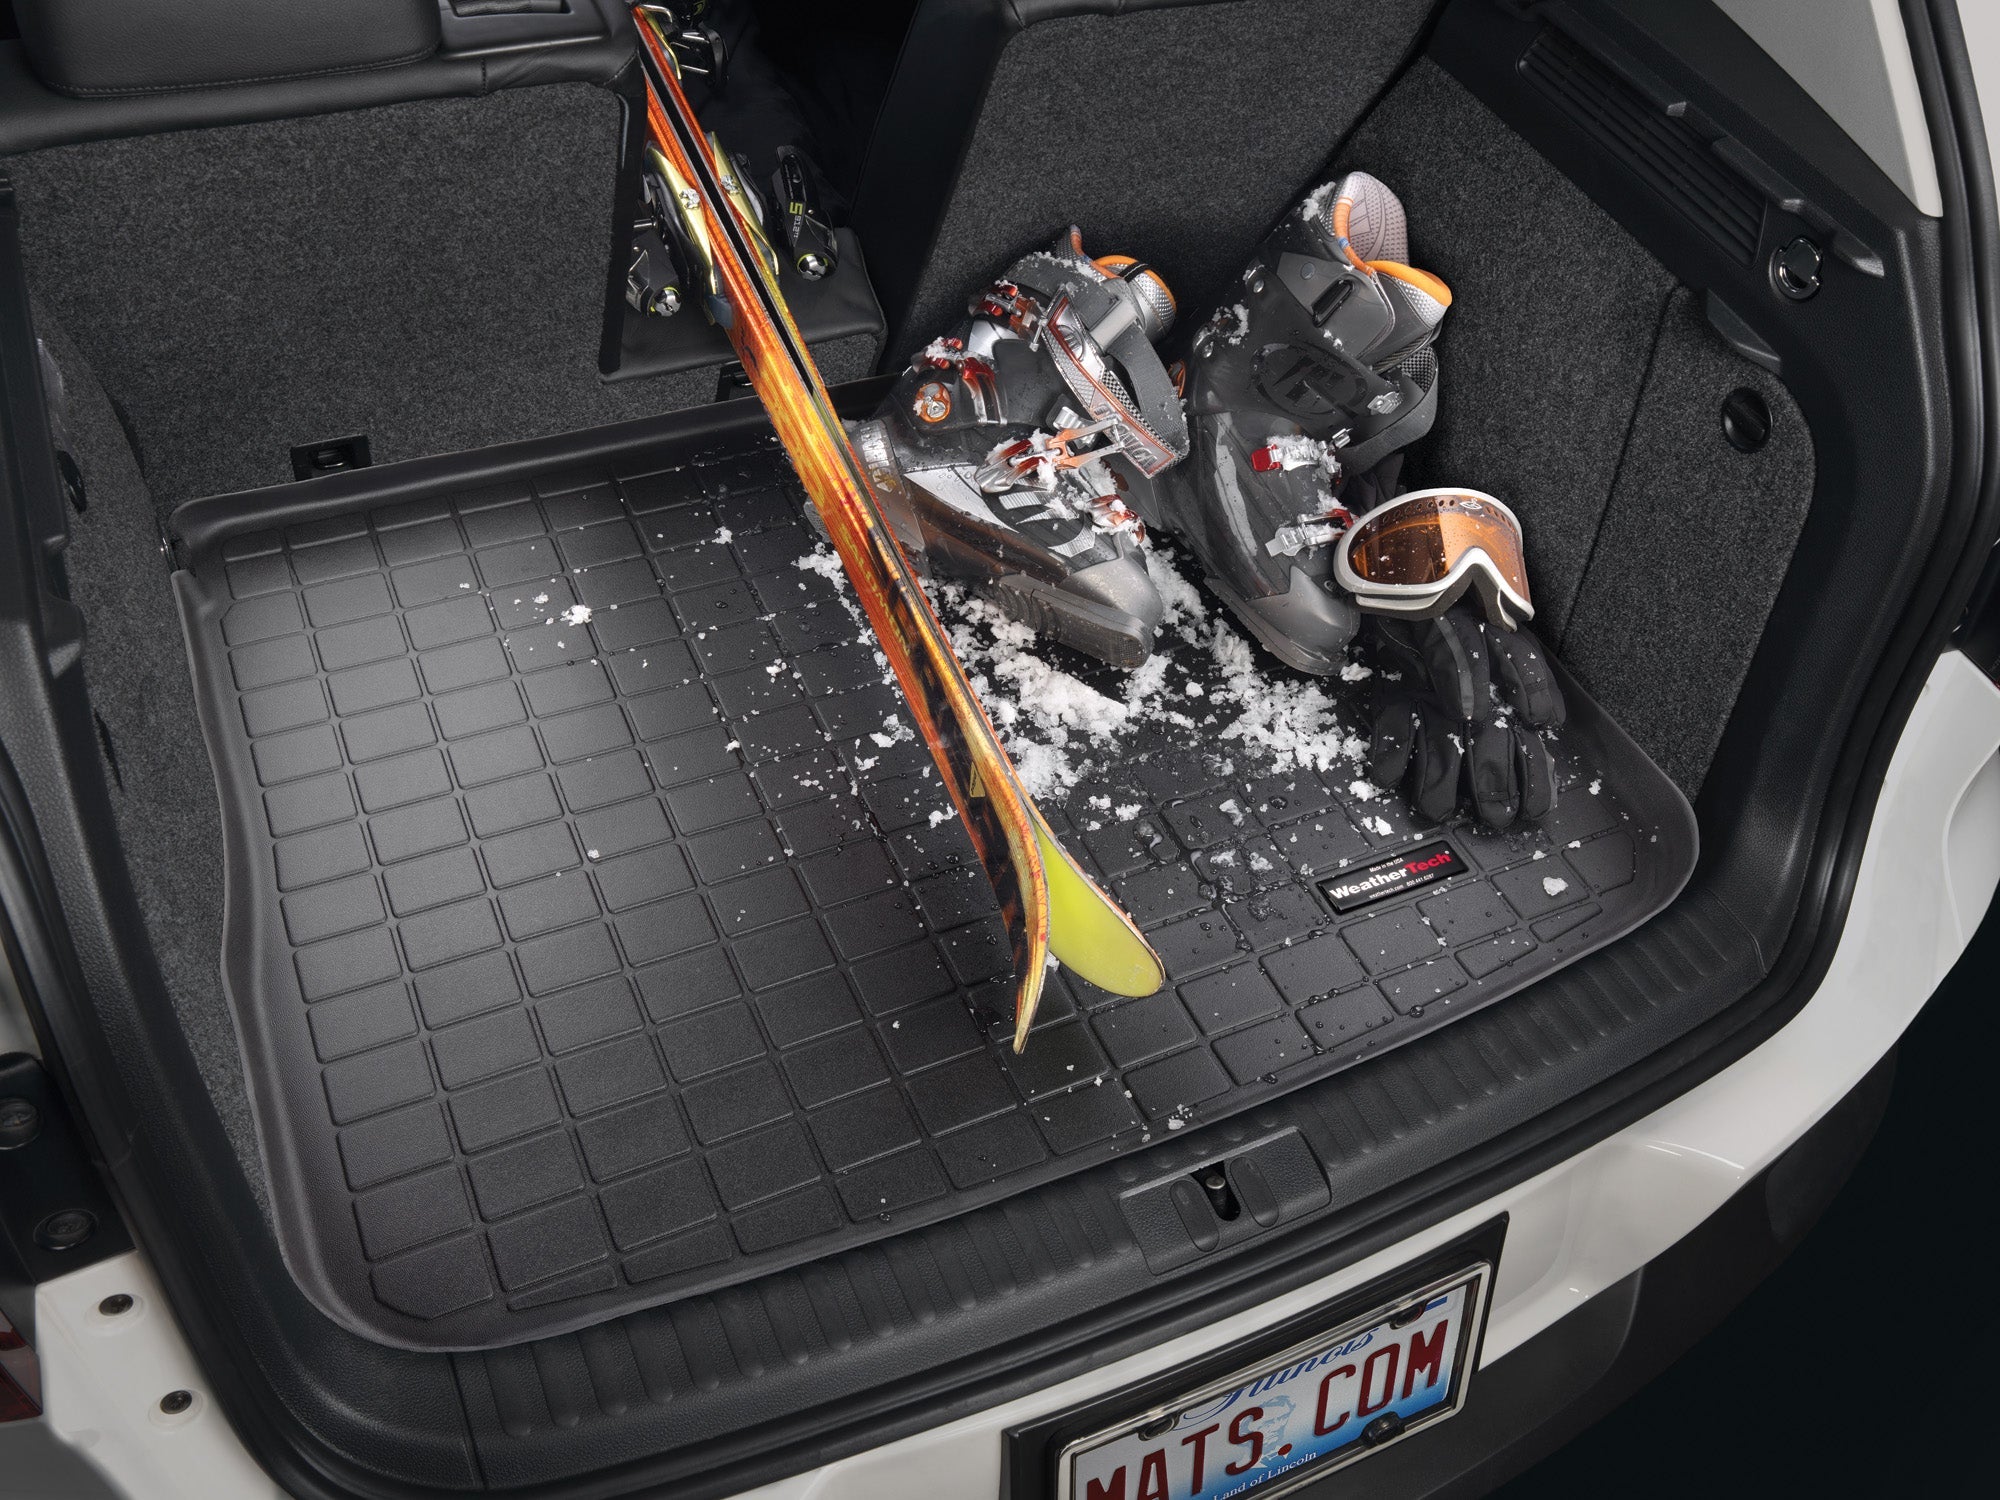 Cargo mats protect the boot and luggage area of your car from daily use, WeatherTech custom-designed car mats, offer full protection, waterproof with high sides and stable fitting they are perfect for everyday use.